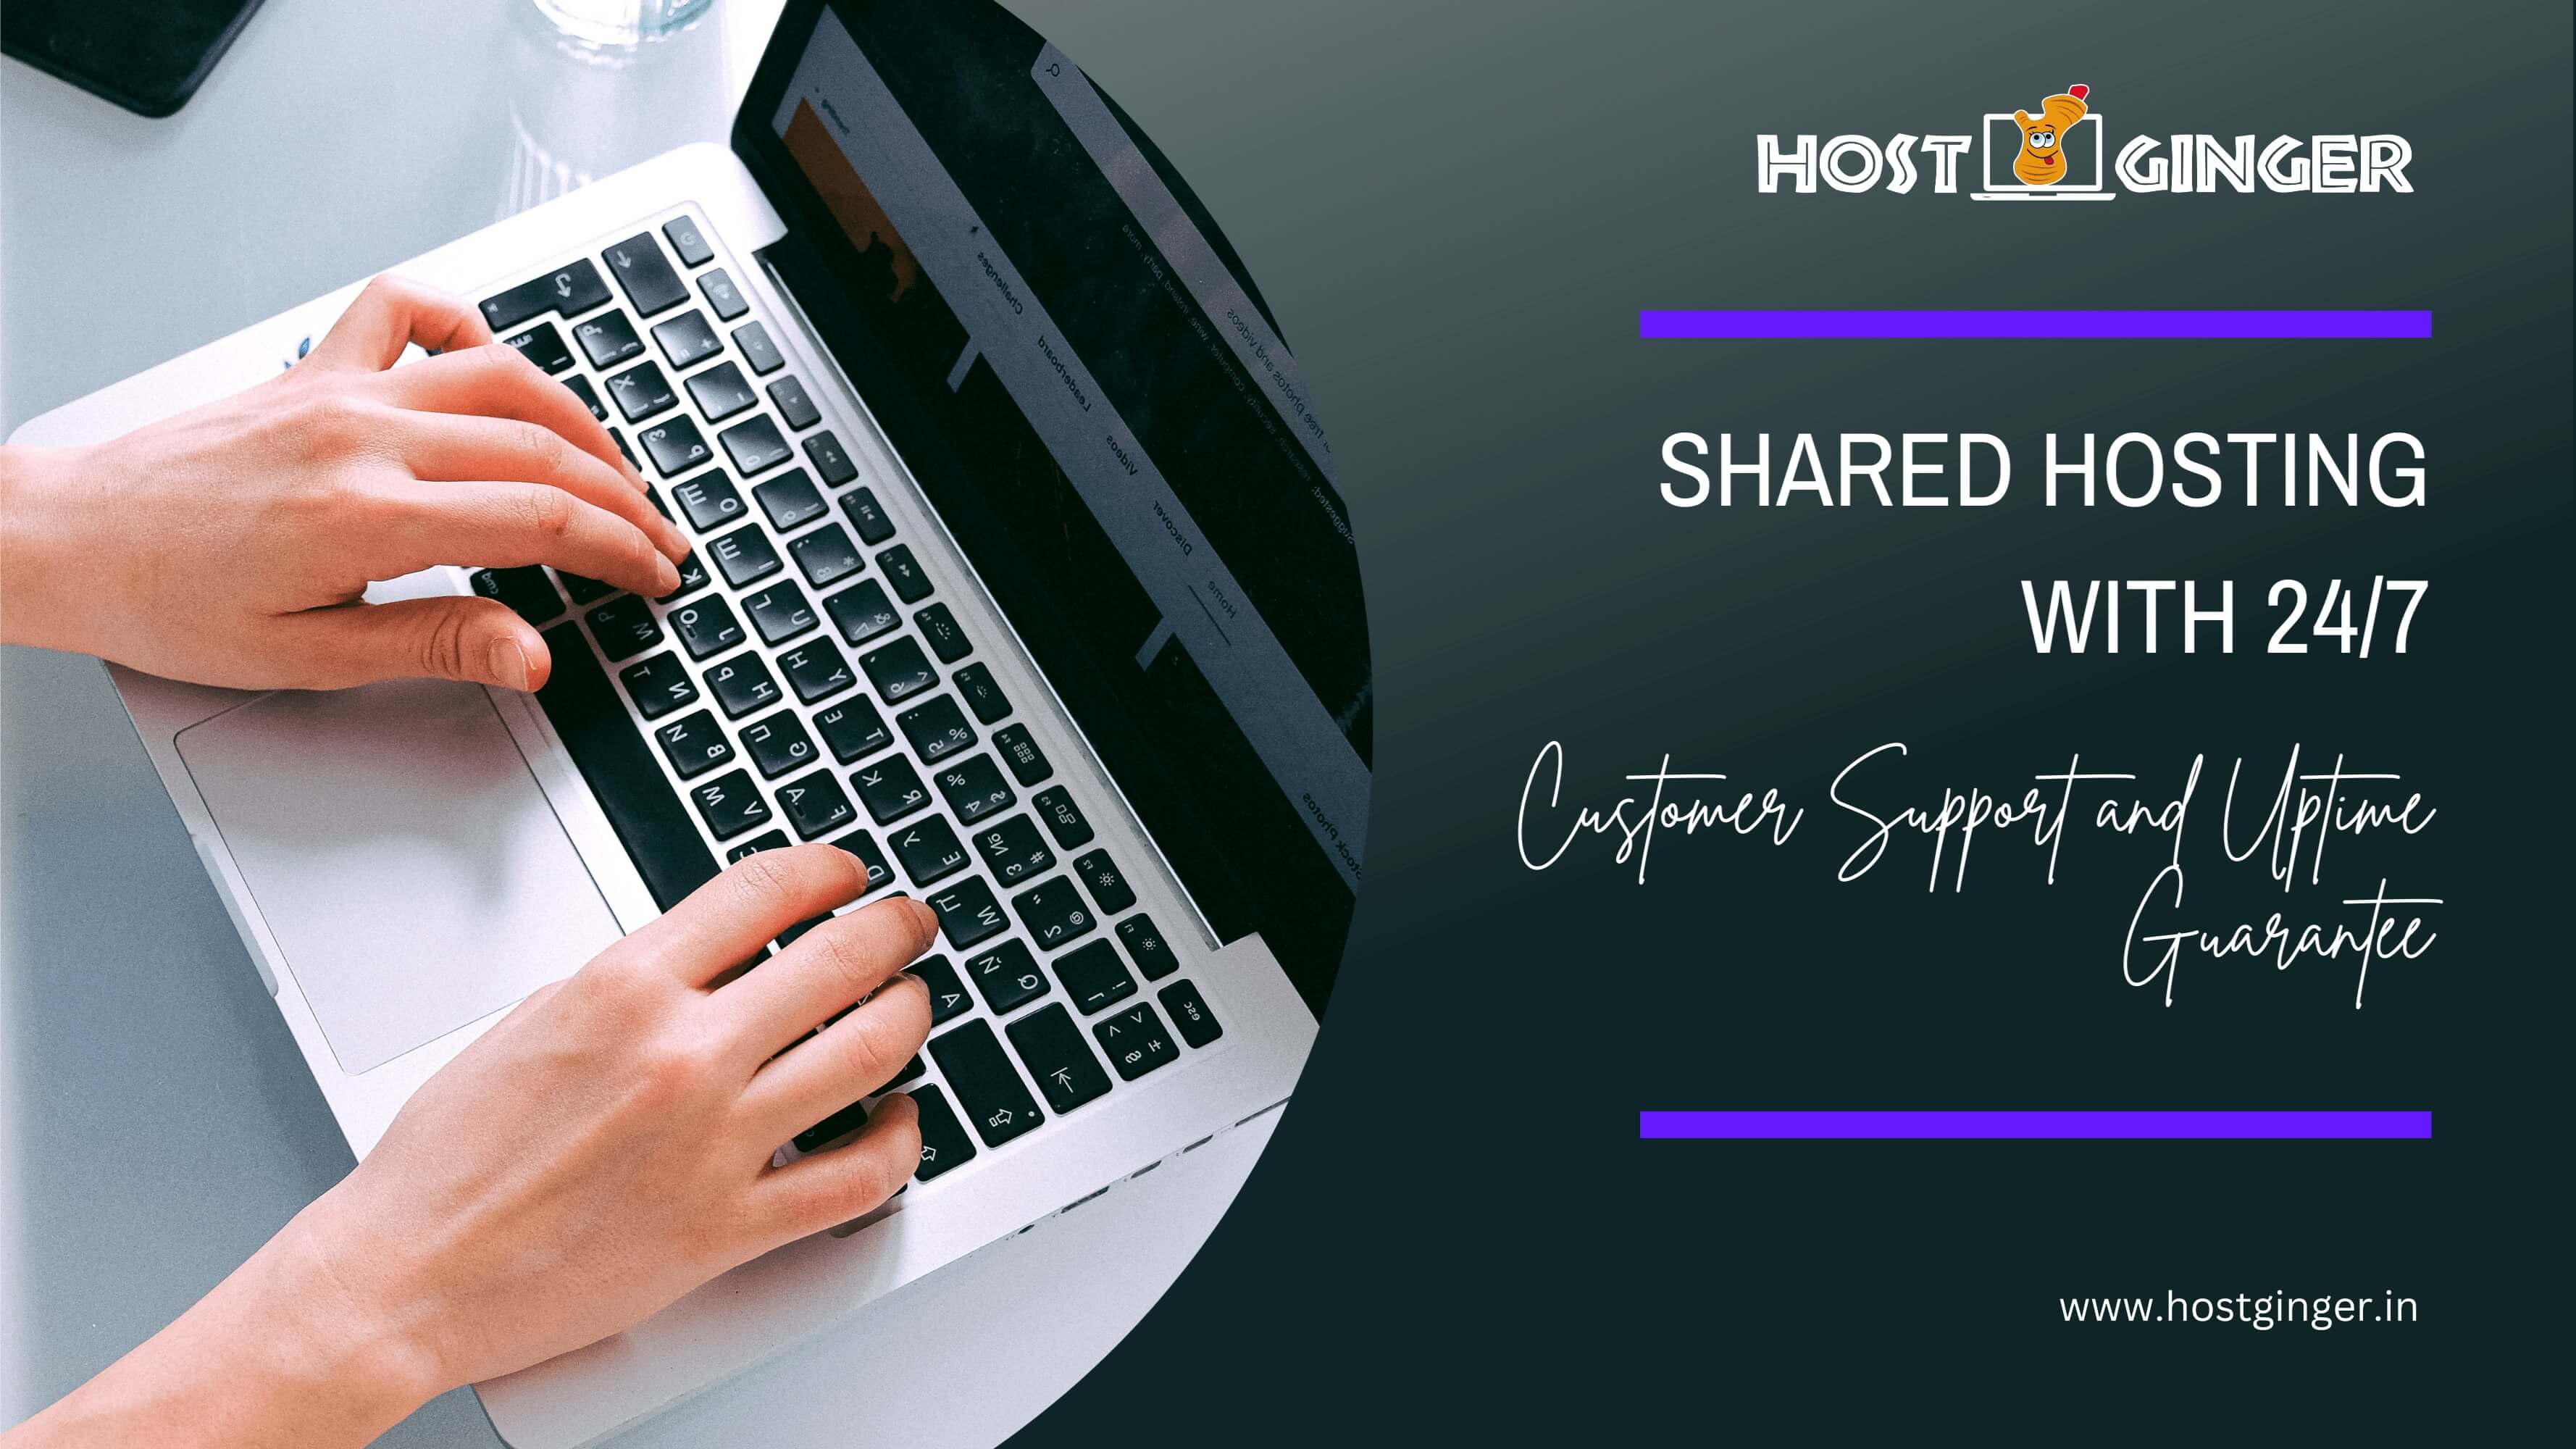 Shared Hosting with 24/7 Customer Support and Uptime Guarantee